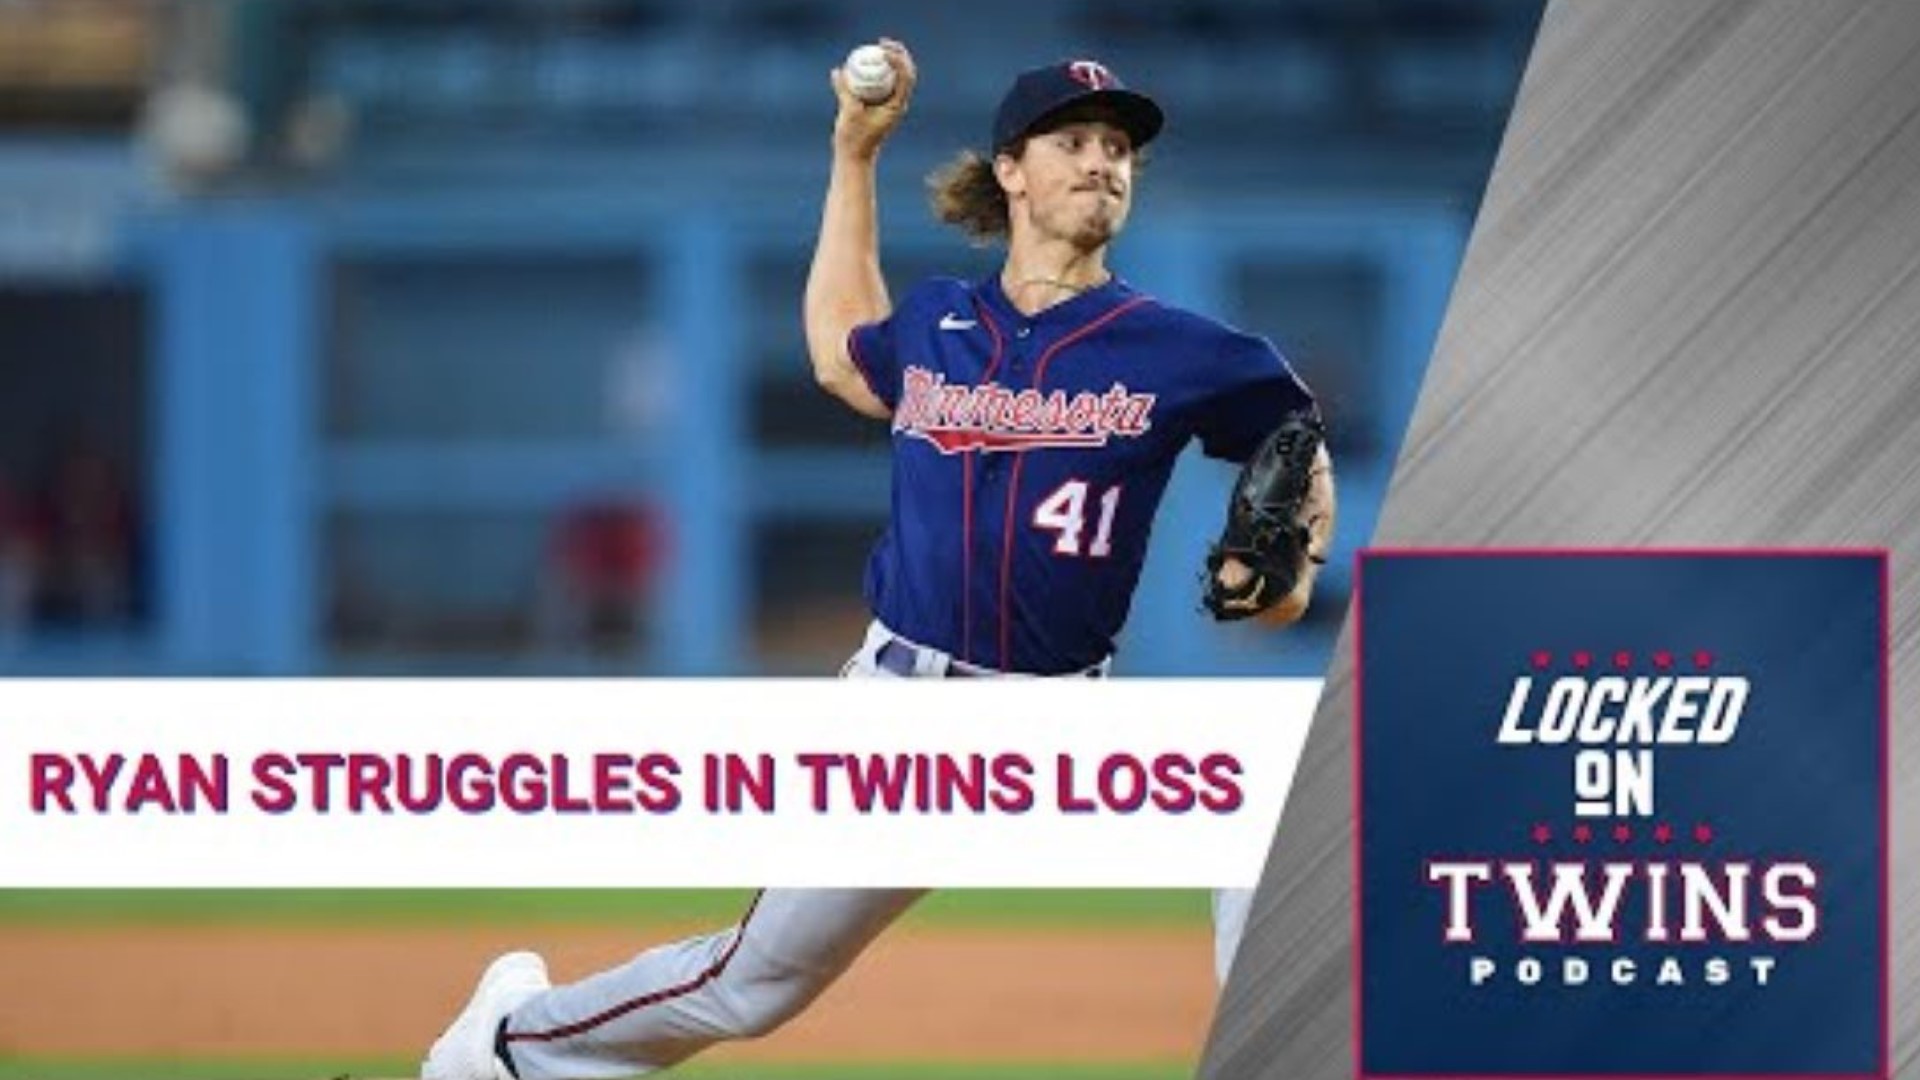 Julio Urías gave up one run over seven innings, shutting the Twins down while the Dodgers' lineup popped Twins' pitching.